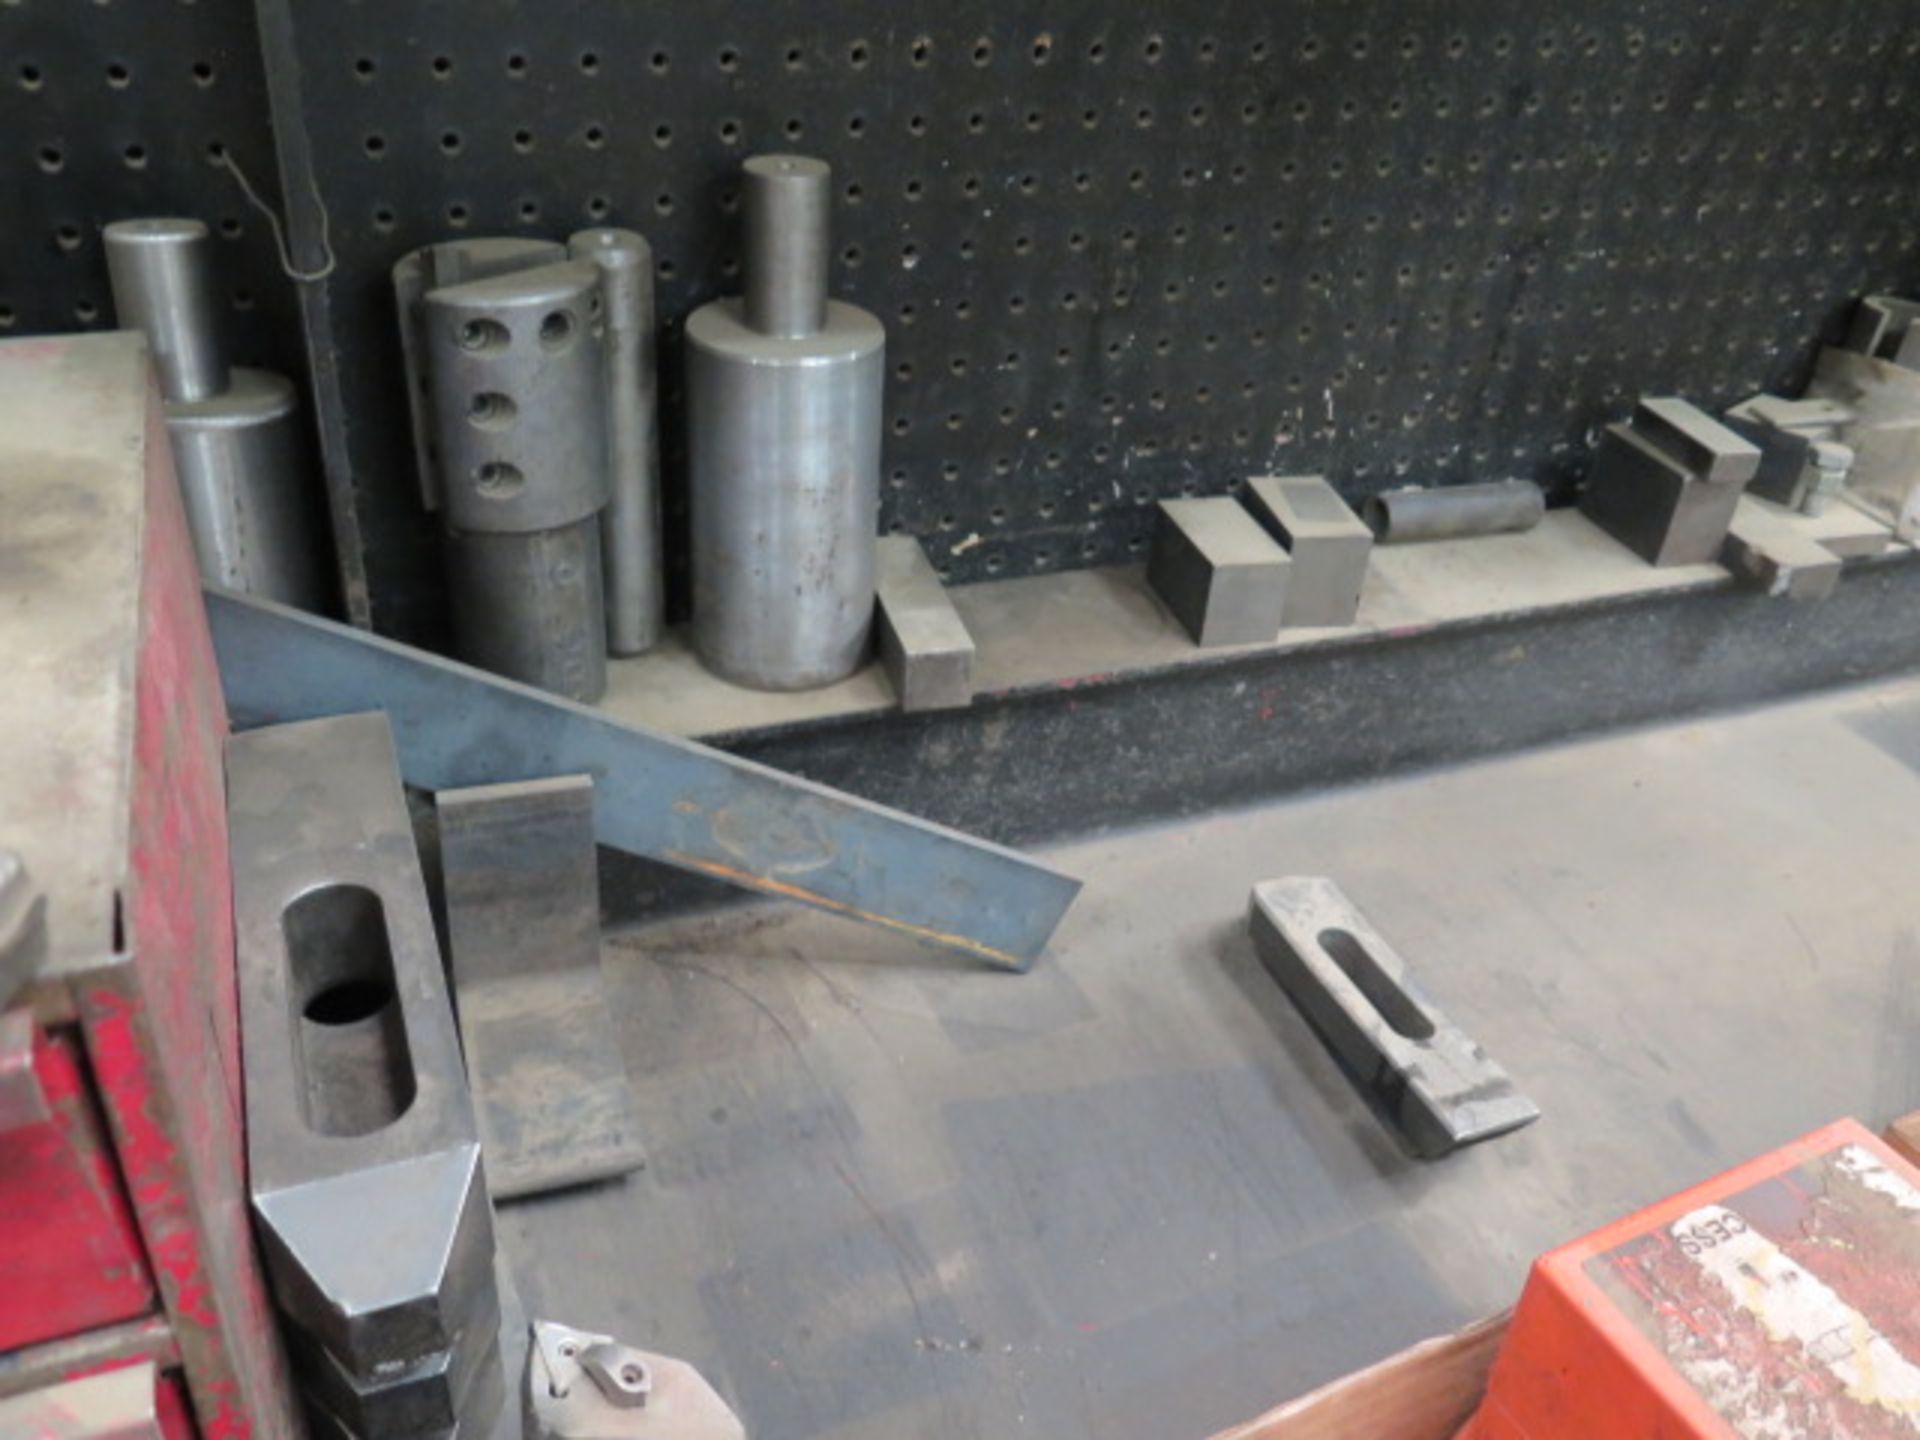 Heavy Duty Steel Table w/ Mill Clamps, Drawered Cabinet and Misc Tooling (SOLD AS-IS - NO WARRANTY) - Image 6 of 10